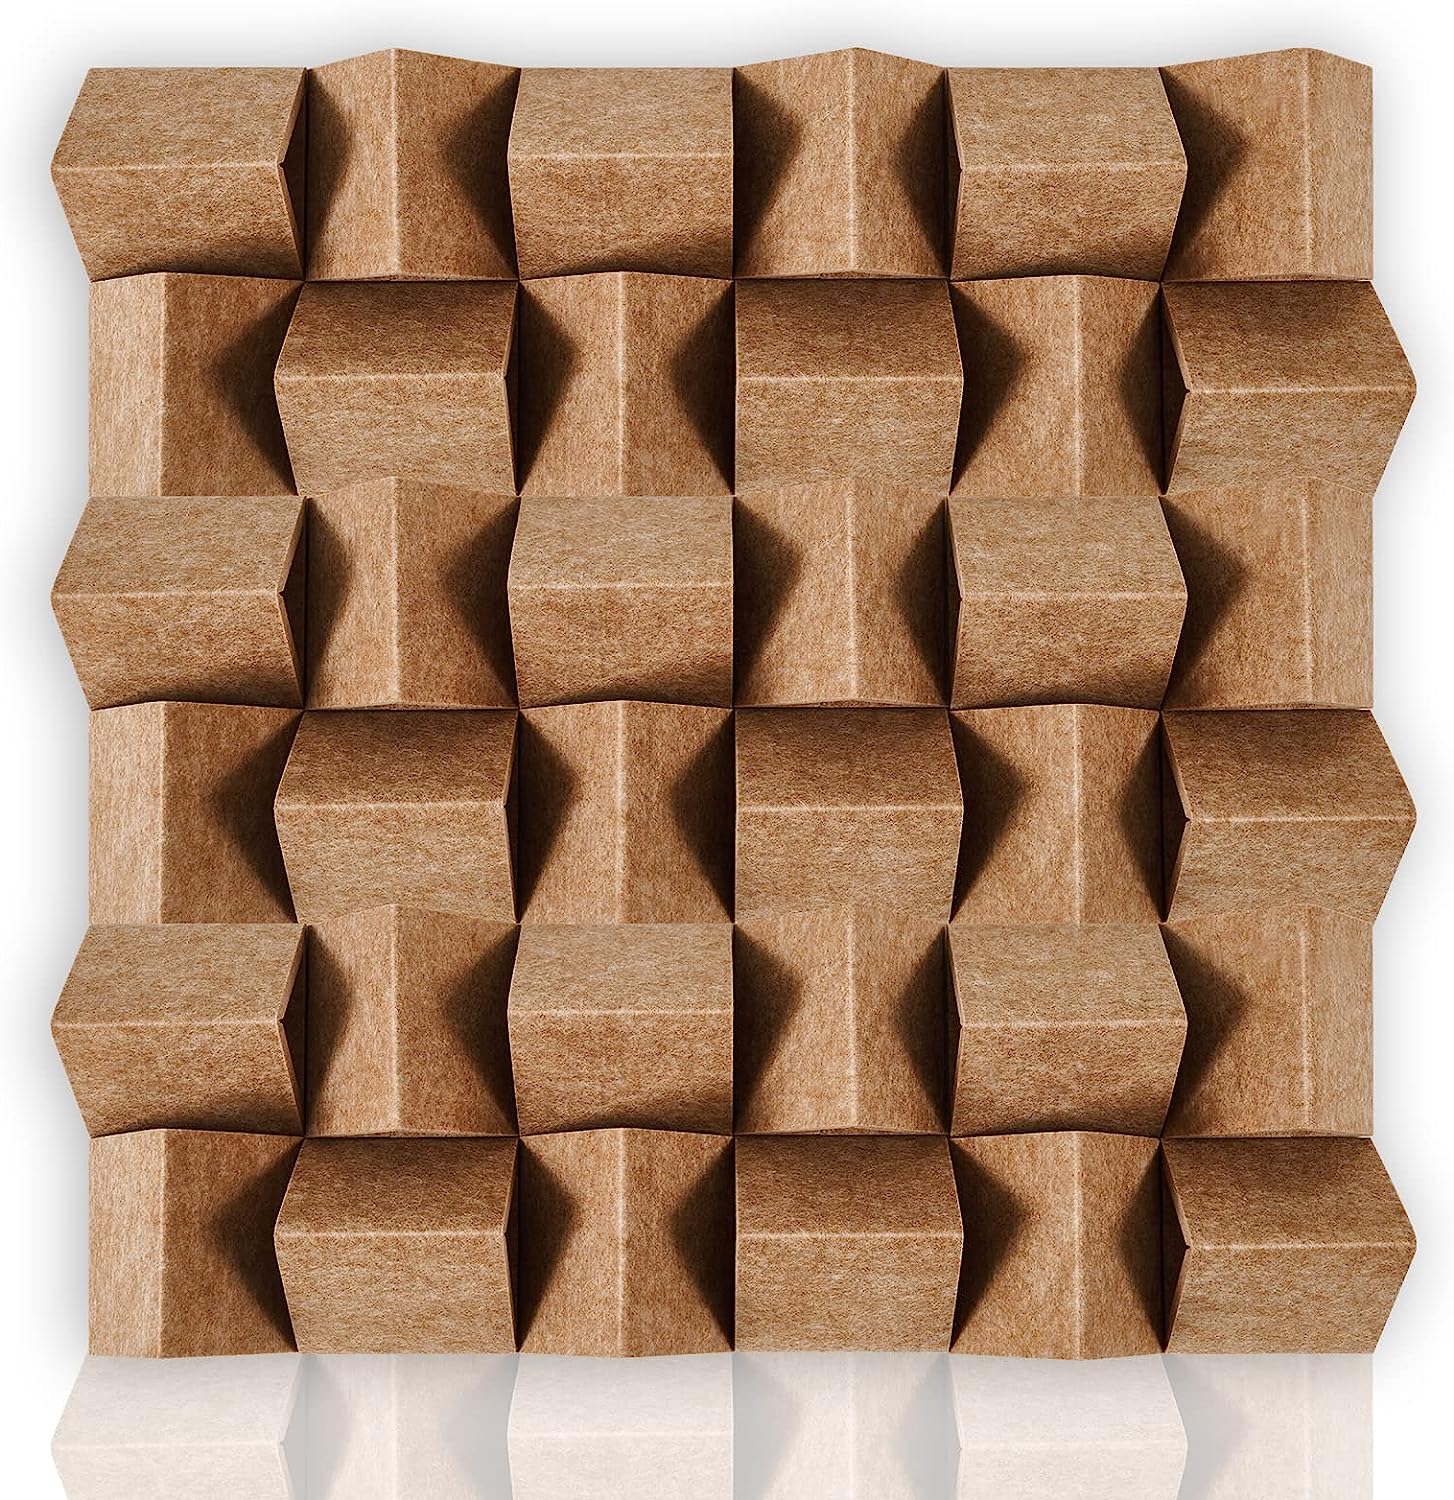 3D Cork Wall Panel Acoustic Panels Cork Wall Tiles Soundproofing